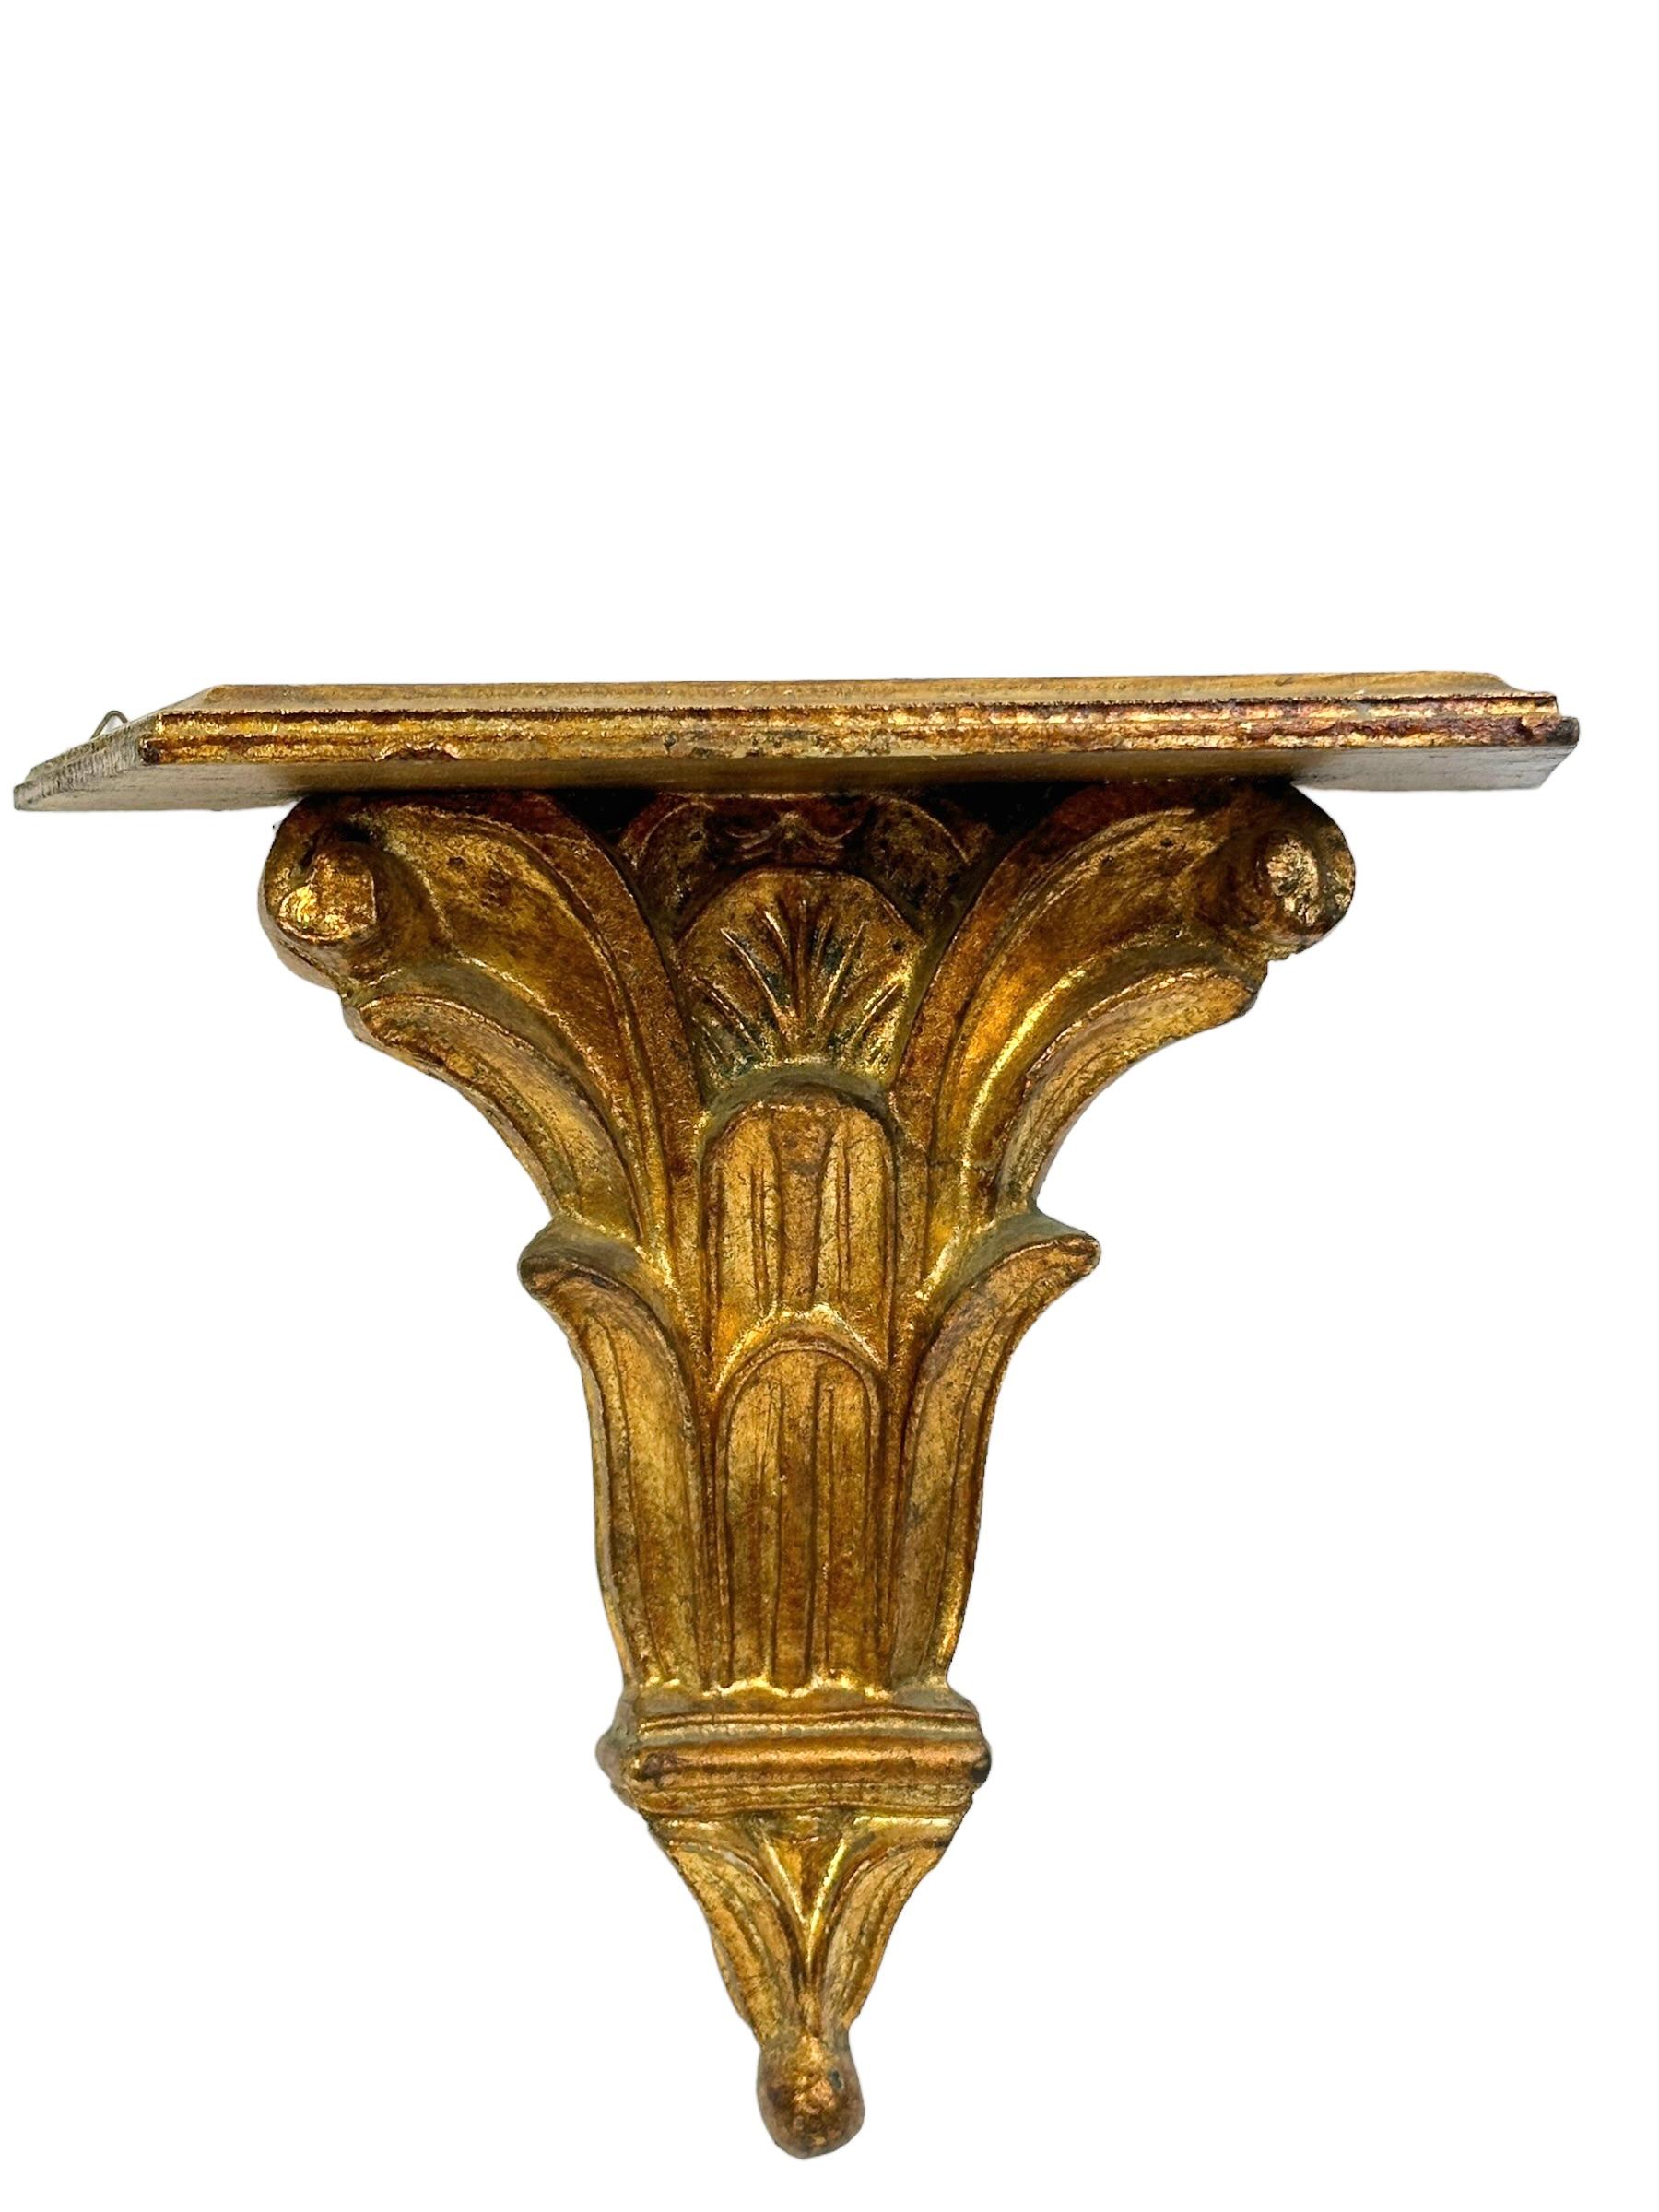 Offered is an absolutely stunning, 1950s wall console or shelf. Minor patina gives this piece a classy statement. Made of hand craft wood, covered with plaster and gilded. Use just as a decorative shelf or put one of your favourite objects on top